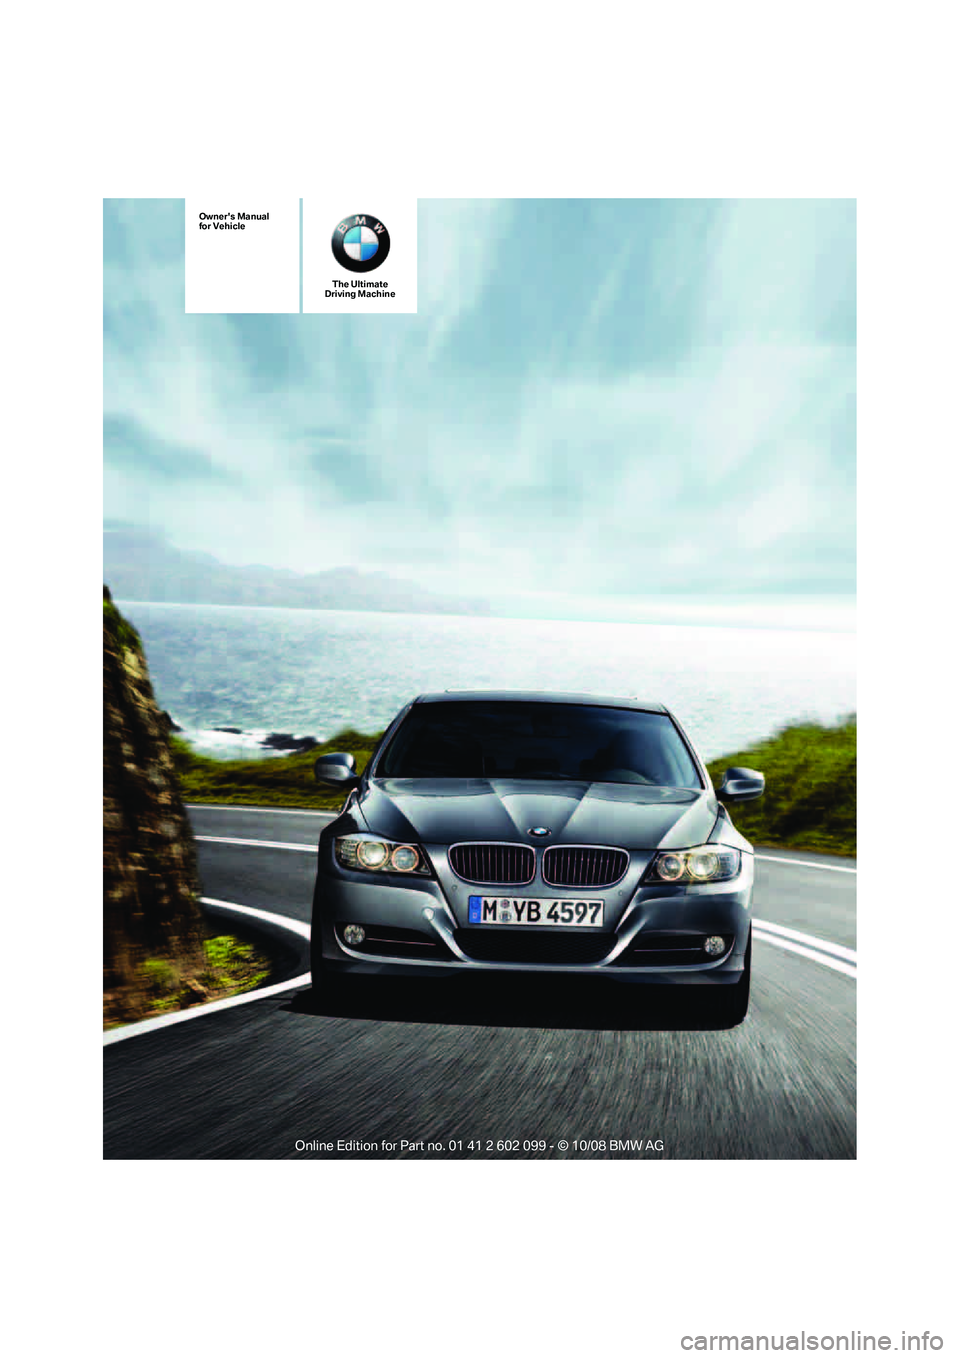 BMW 328I XDRIVE 2009  Owners Manual The Ultimate
Driving Machine
Owners Manual
for Vehicle
ba8_E9091_cic.book  Seite 1  Mittwoch, 29. Oktober 2008  2:59 14 